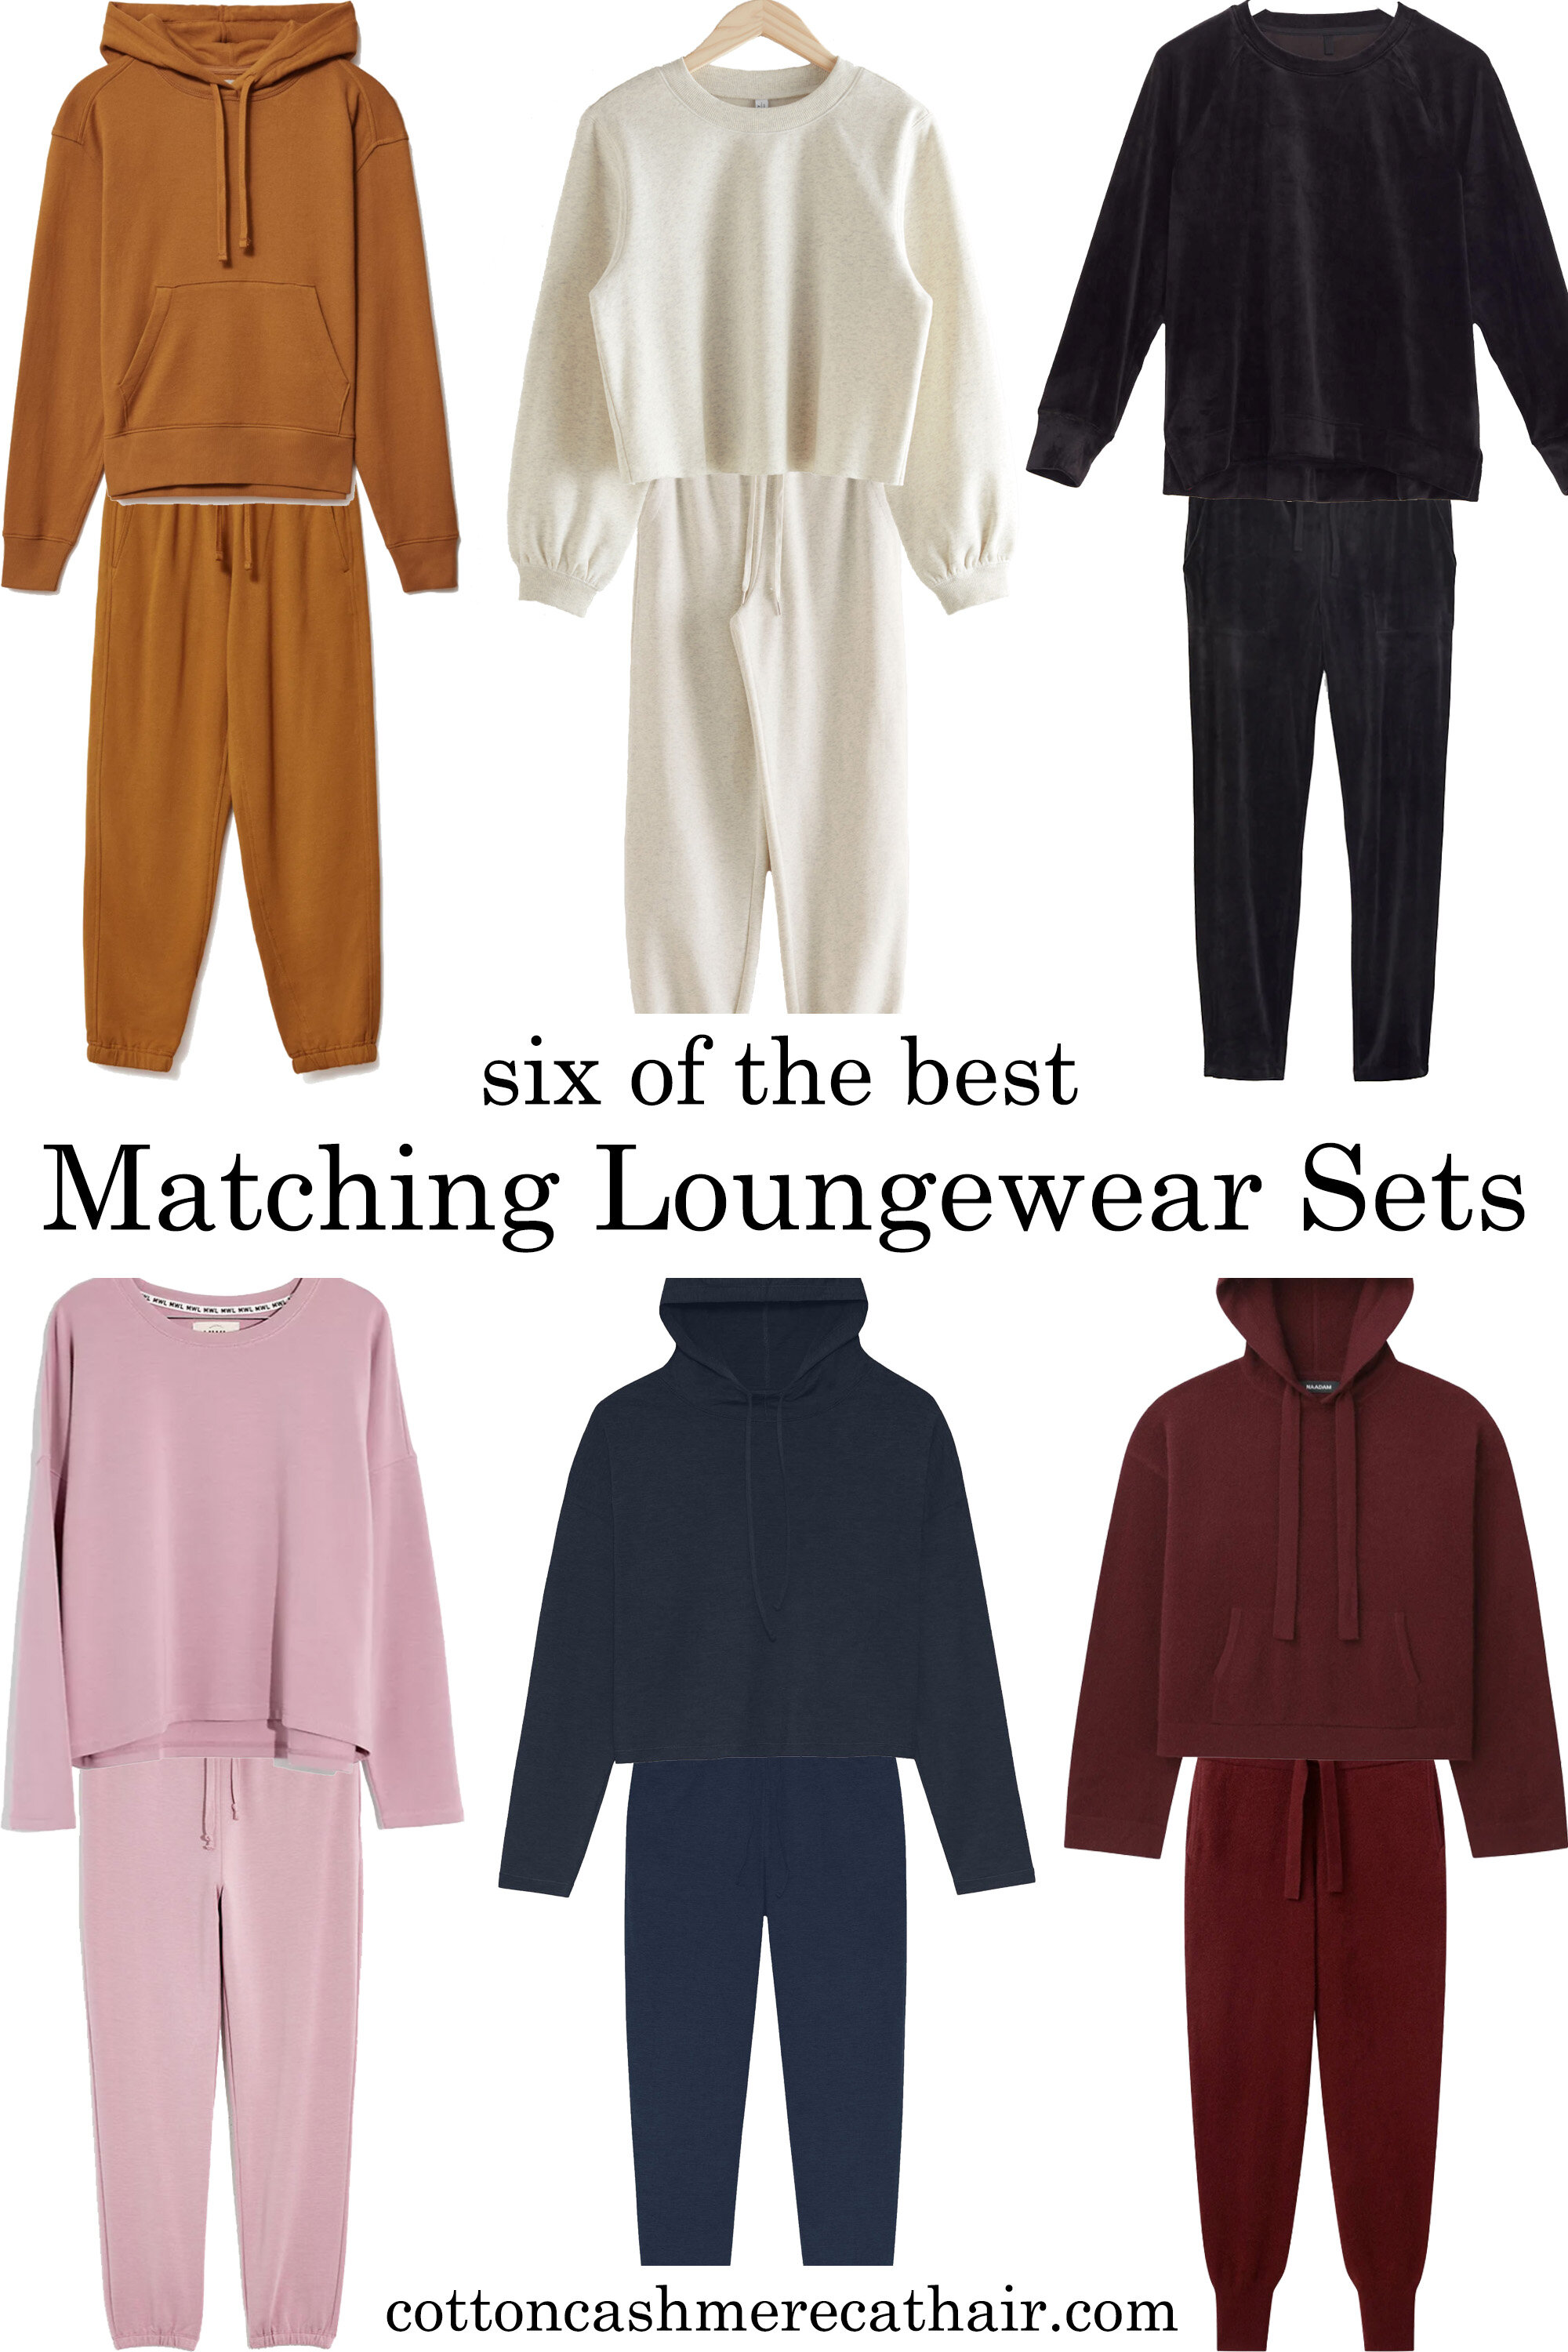 From Sweatshirts To Cashmere Sets: A Loungewear Glow-Up For Winter - The  Mom Edit